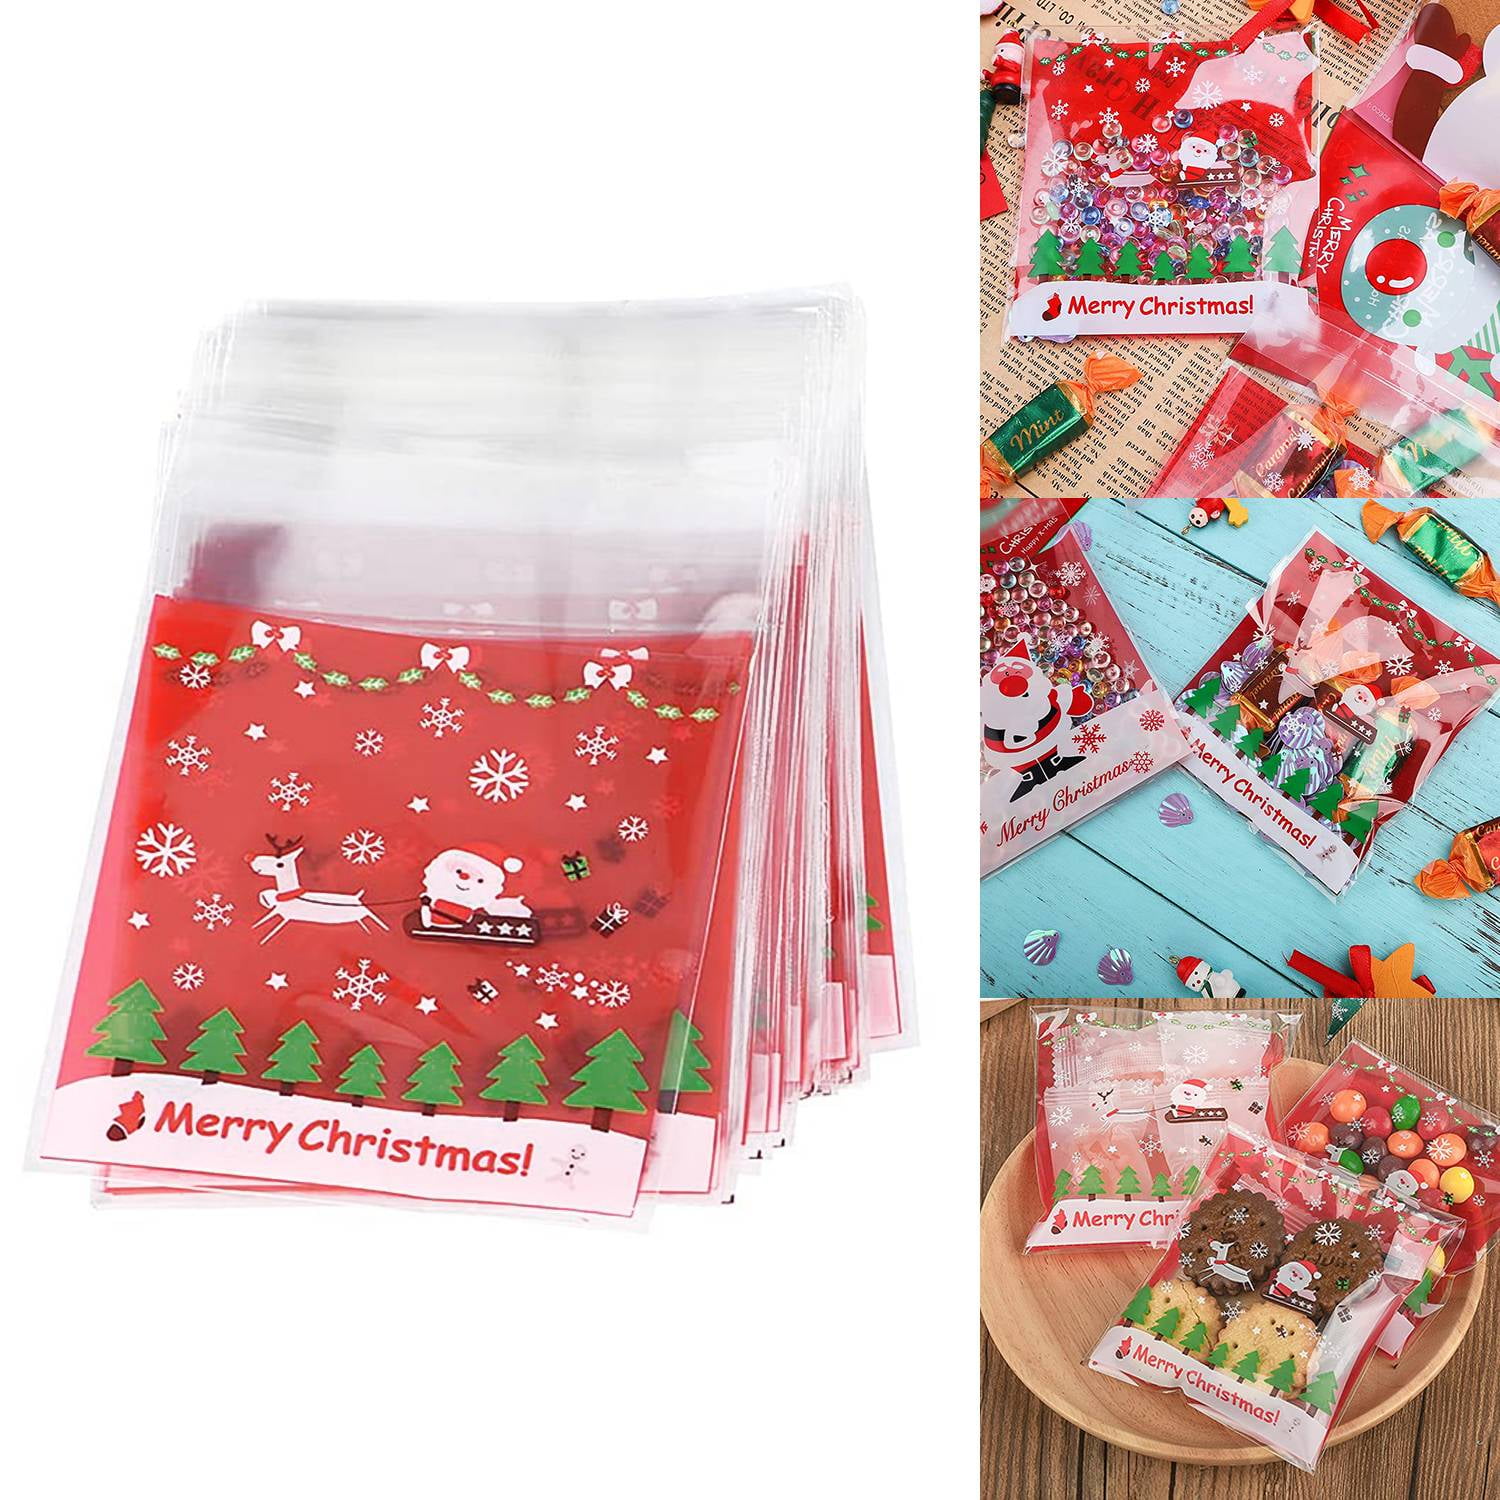 25 LITTLE BITTY BAGS MINI PAPER BAGS PARTY FAVOUR SWEET TREATS CHRISTMAS CRAFTS 